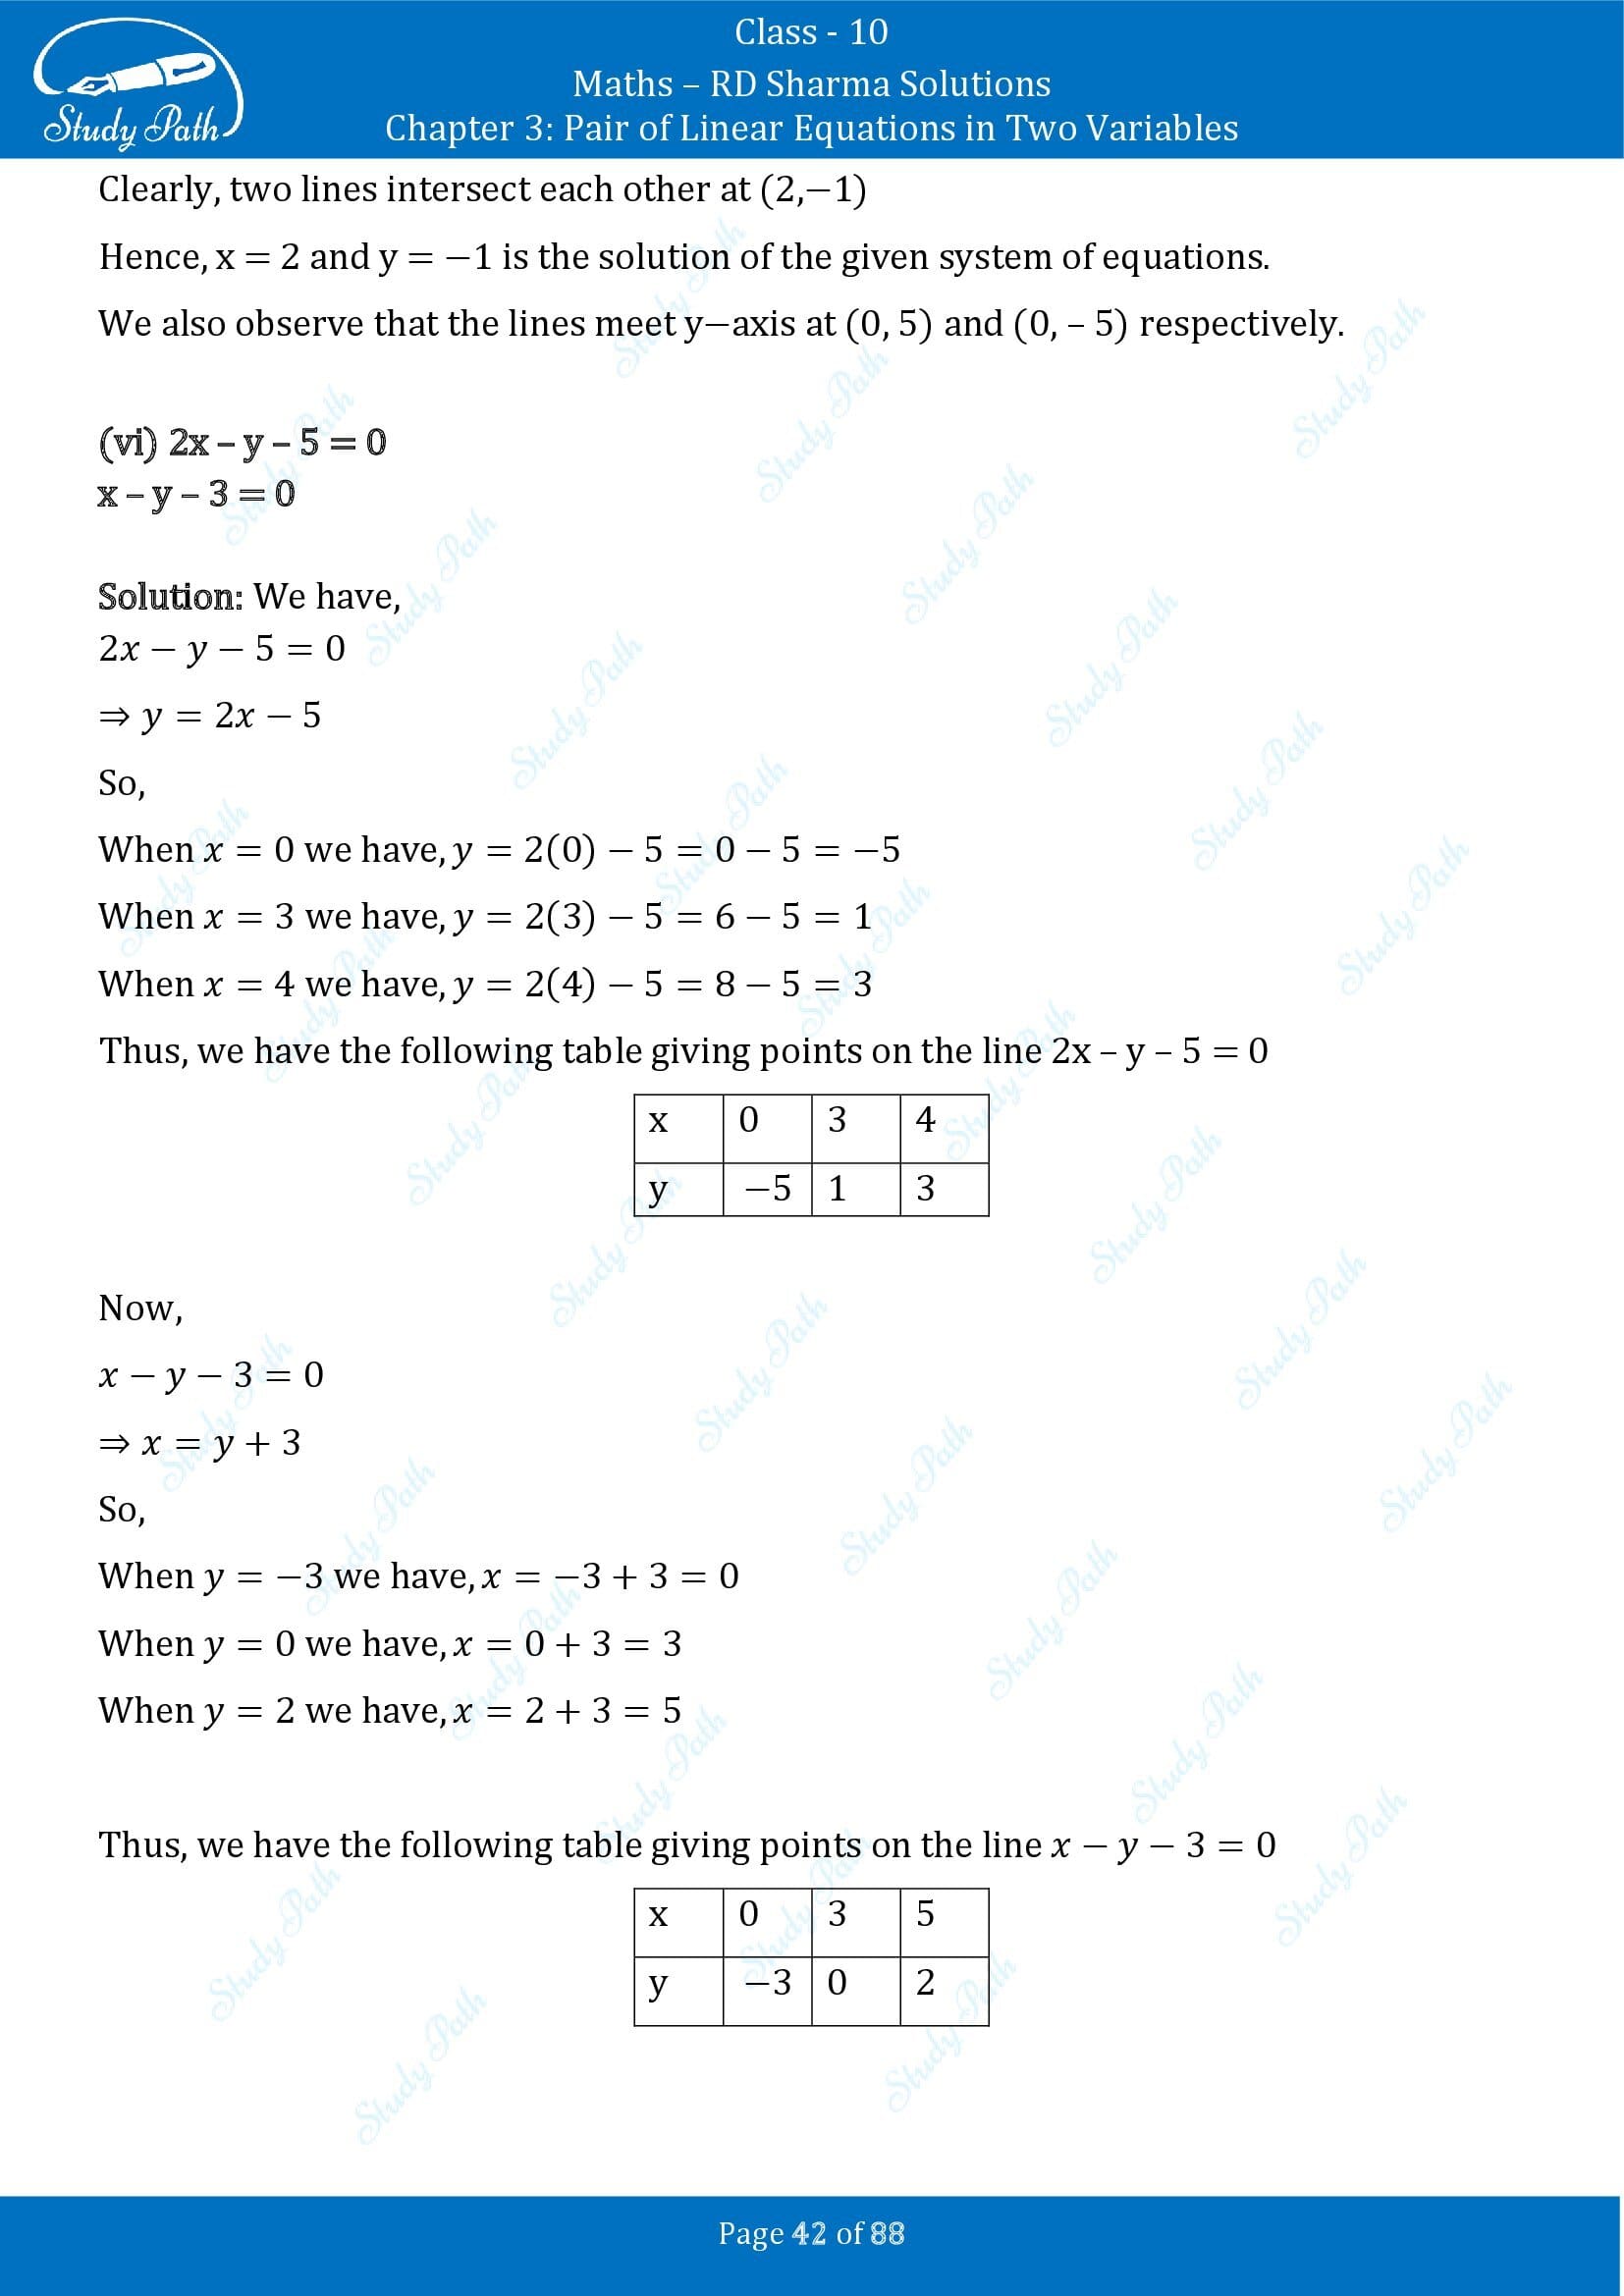 RD Sharma Solutions Class 10 Chapter 3 Pair of Linear Equations in Two Variables Exercise 3.2 00042